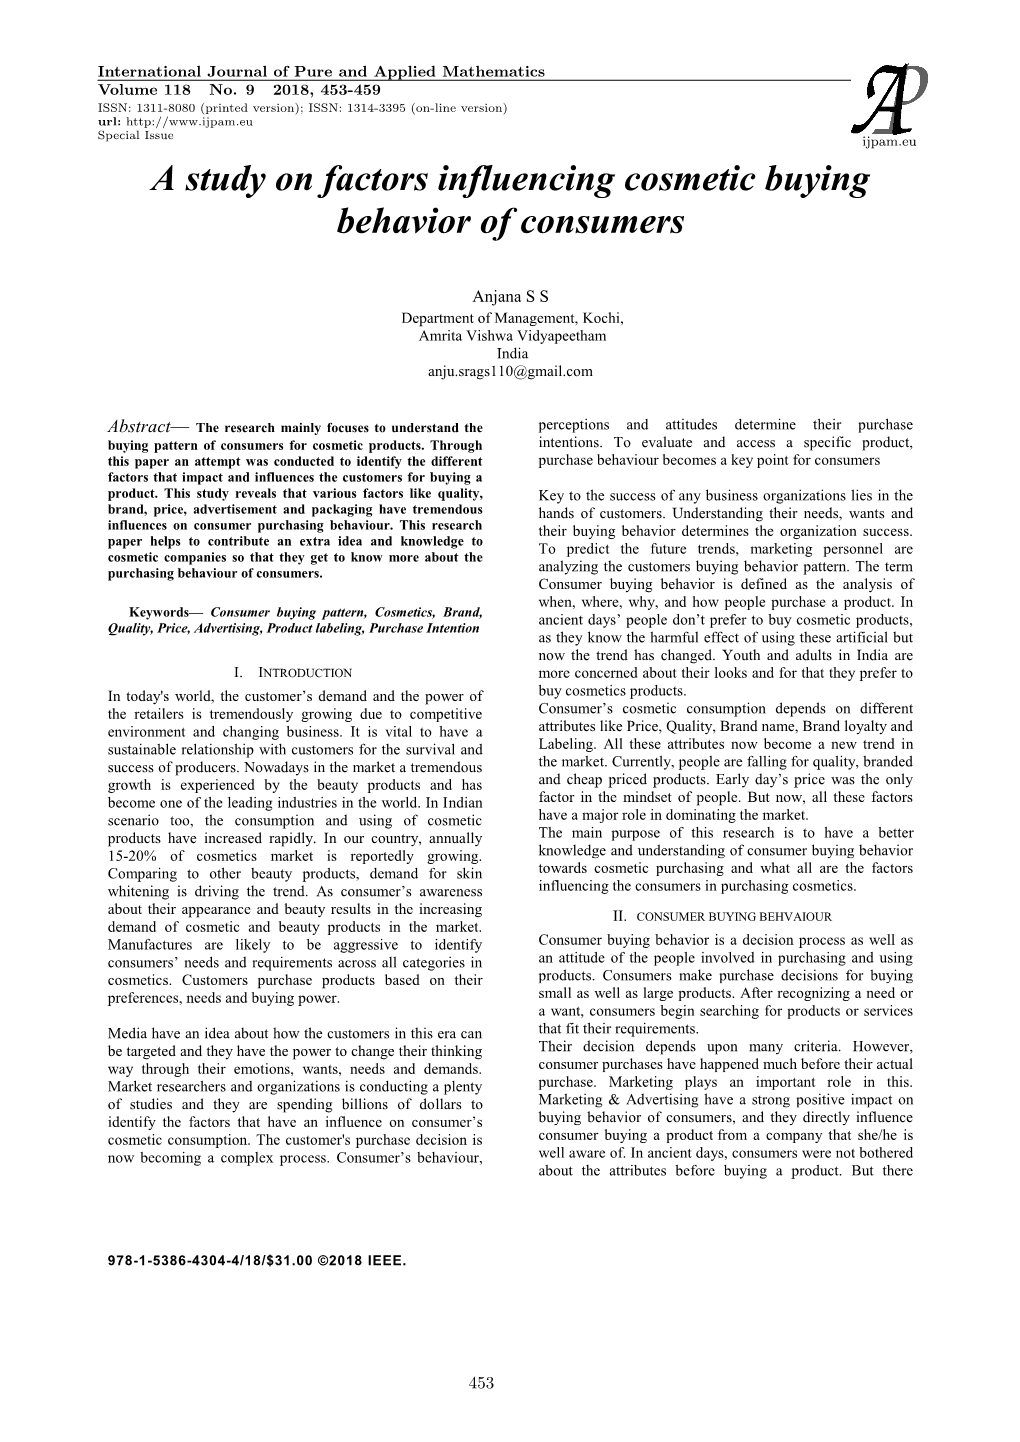 A Study on Factors Influencing Cosmetic Buying Behavior of Consumers